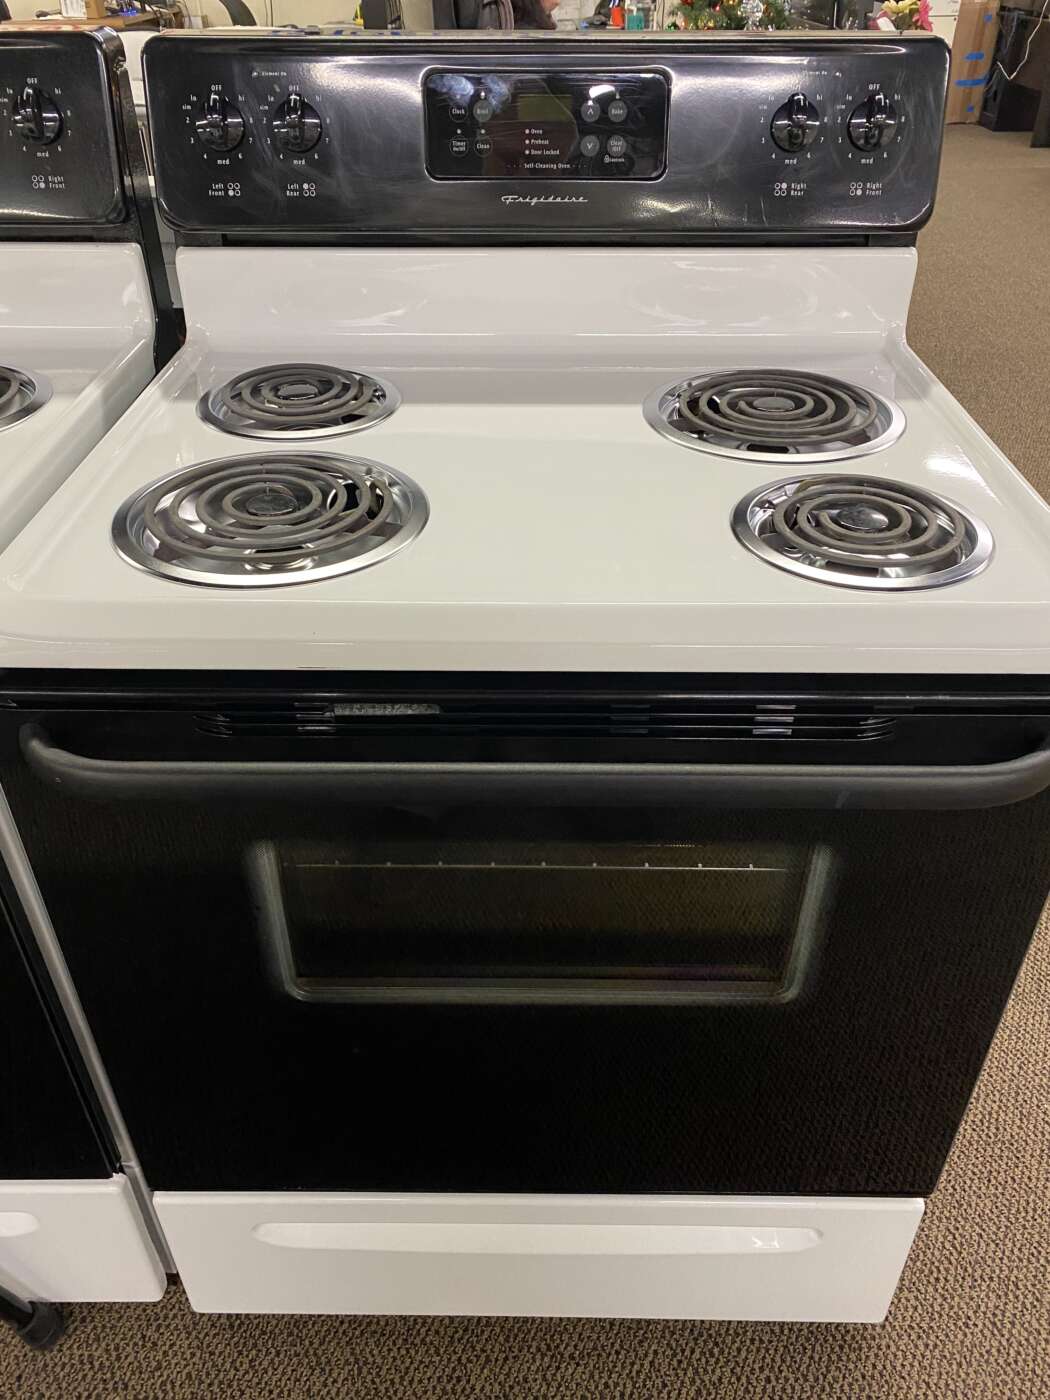 Reconditioned BROWN Standard-Oven Electric Range - White - Howie Voigt